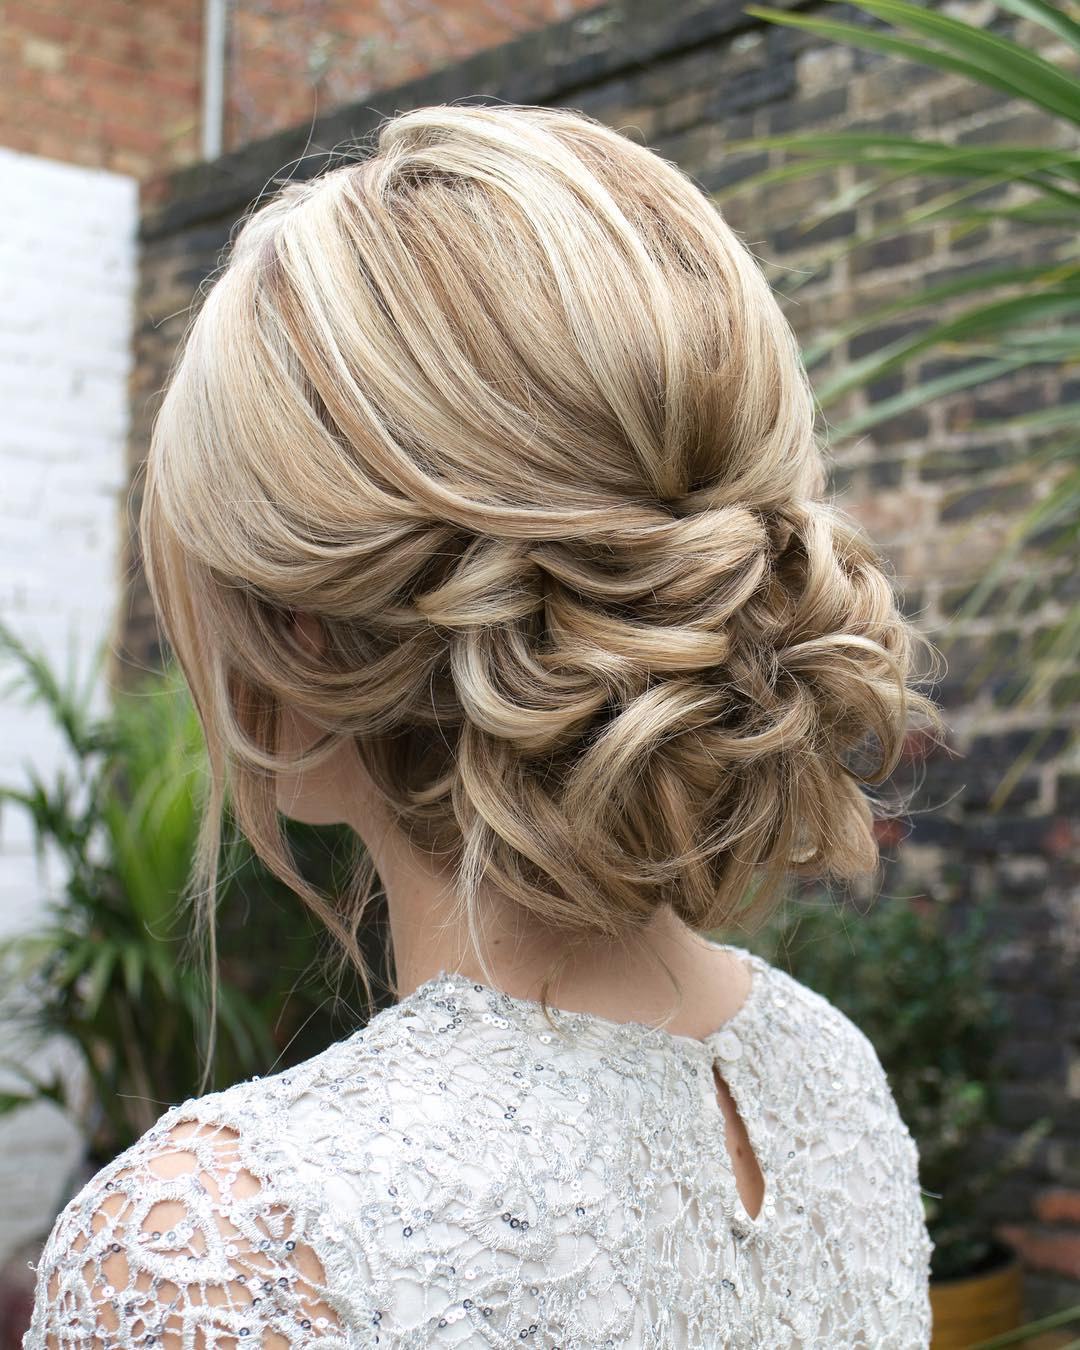 Hairstyles For Prom 2020
 10 Gorgeous Prom Updos for Long Hair Prom Updo Hairstyles